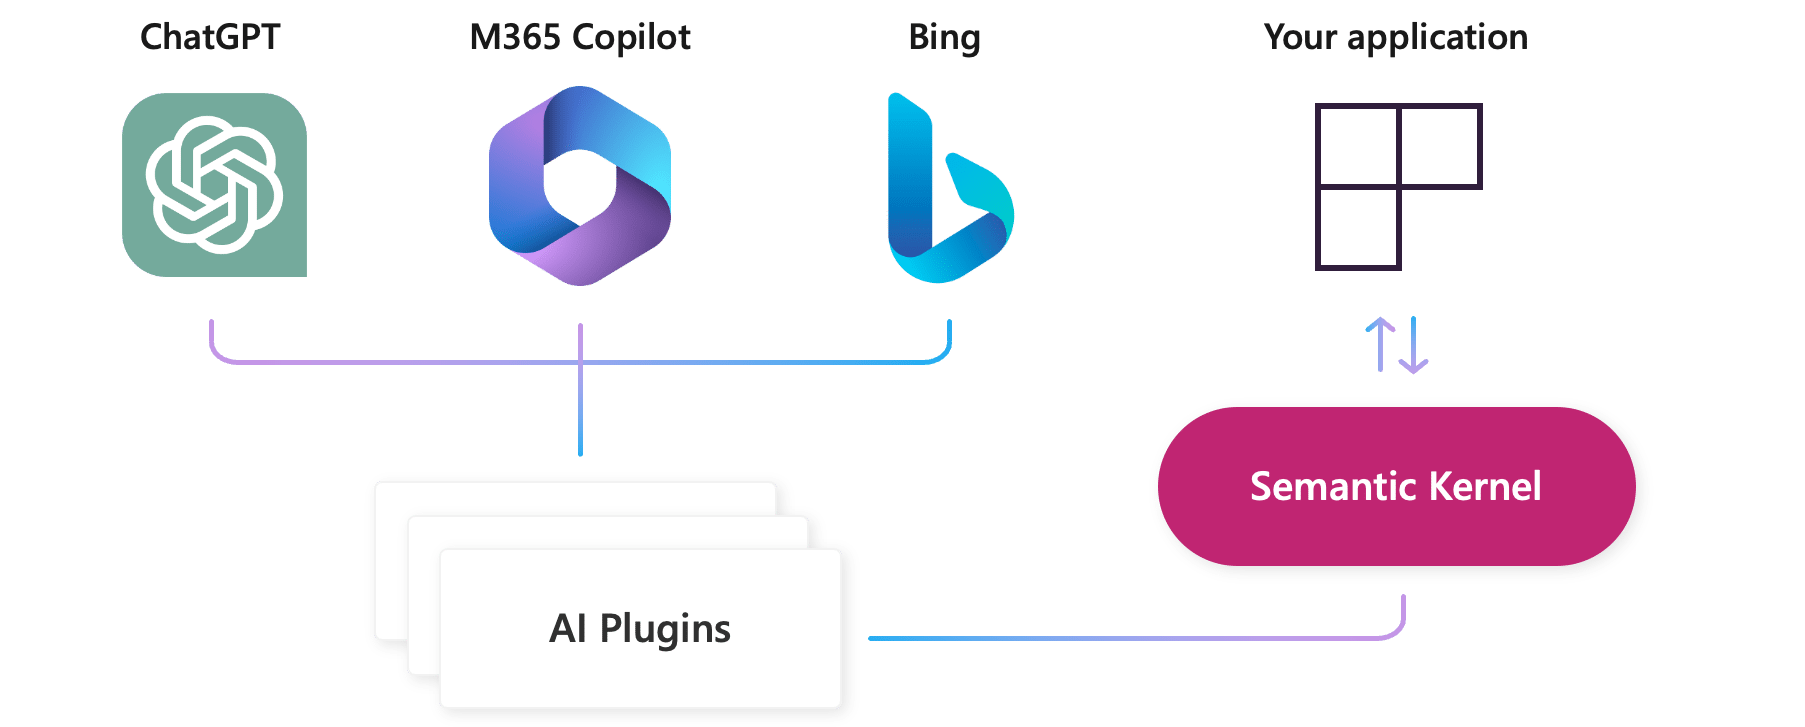 Semantic Kernel can orchestrate AI plugins from any provider